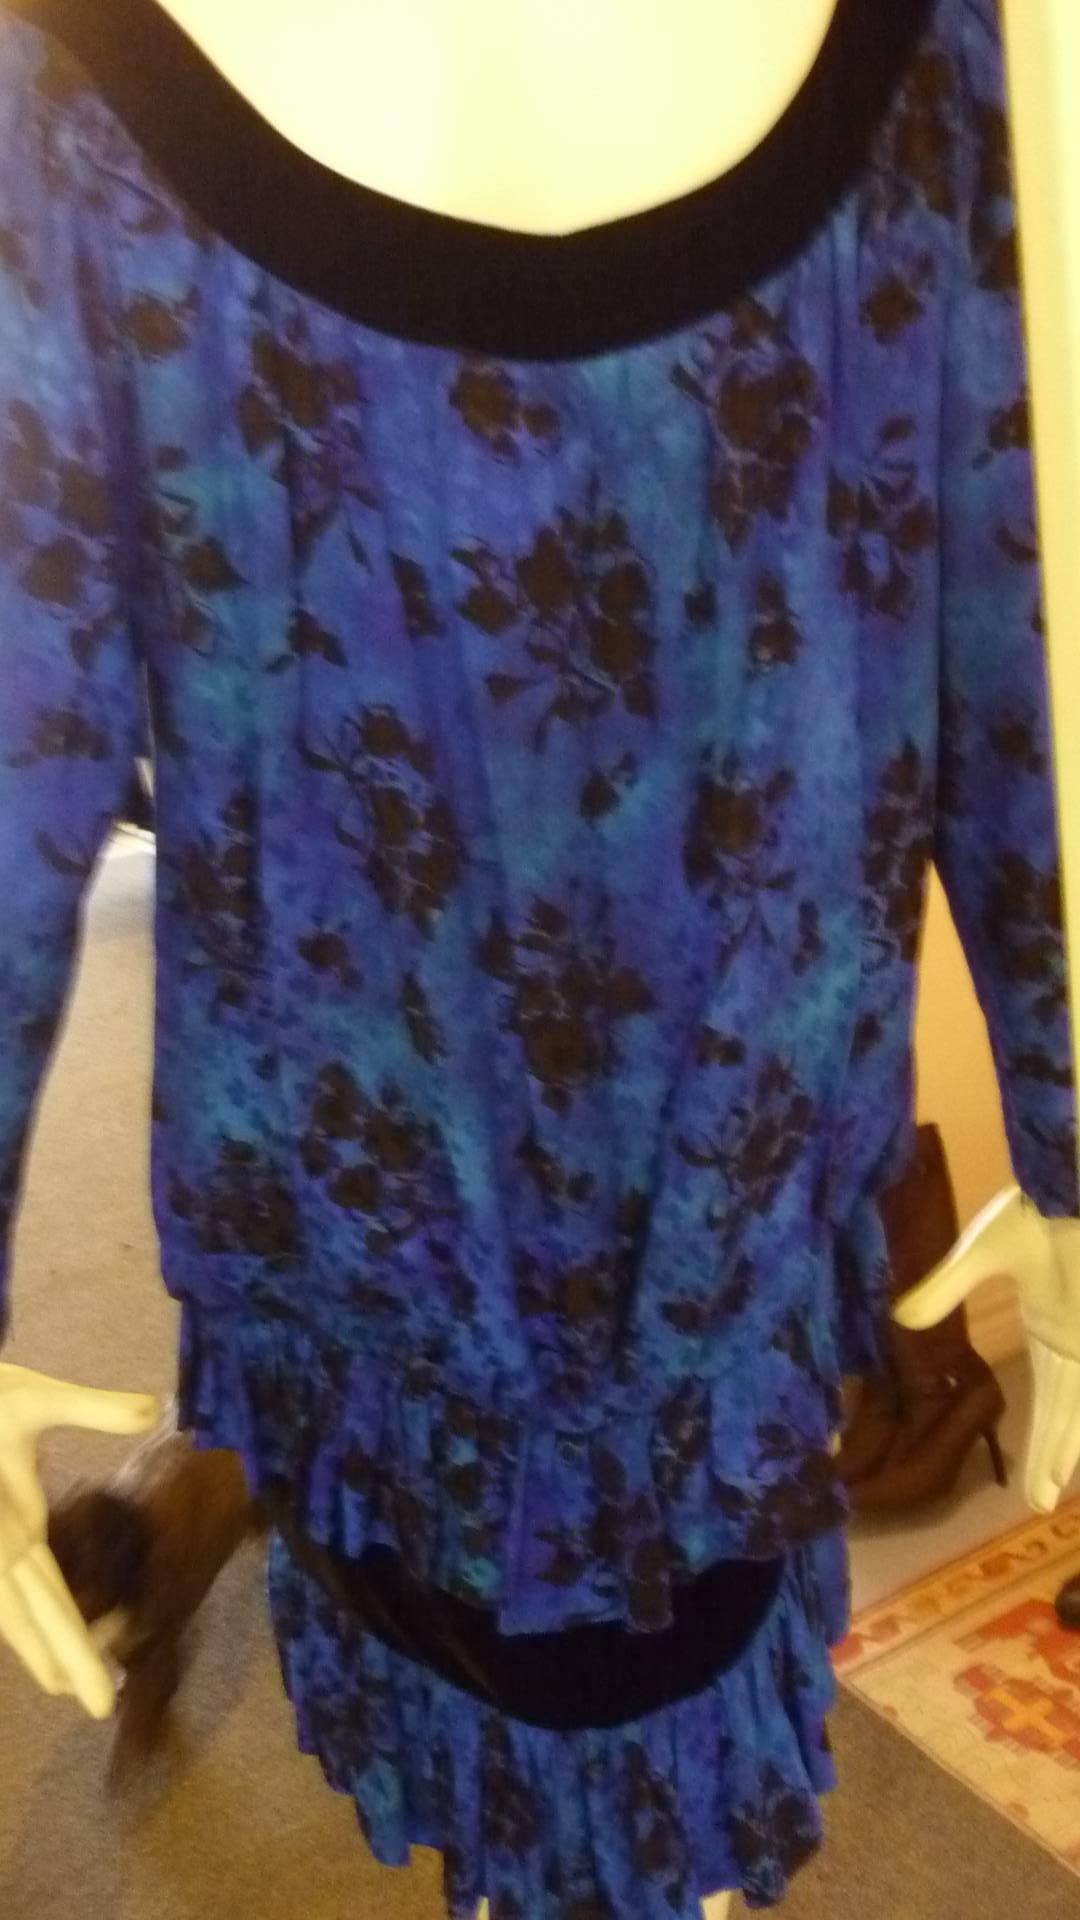 Silk dress in a lovely irridescent blue with a black floral print. There is a black velvet trim on the collar as well as a velvet panel on the skirt. The dress also features a dropped waist look and a ruffle.

The sleeves have a zip at the cuffs and